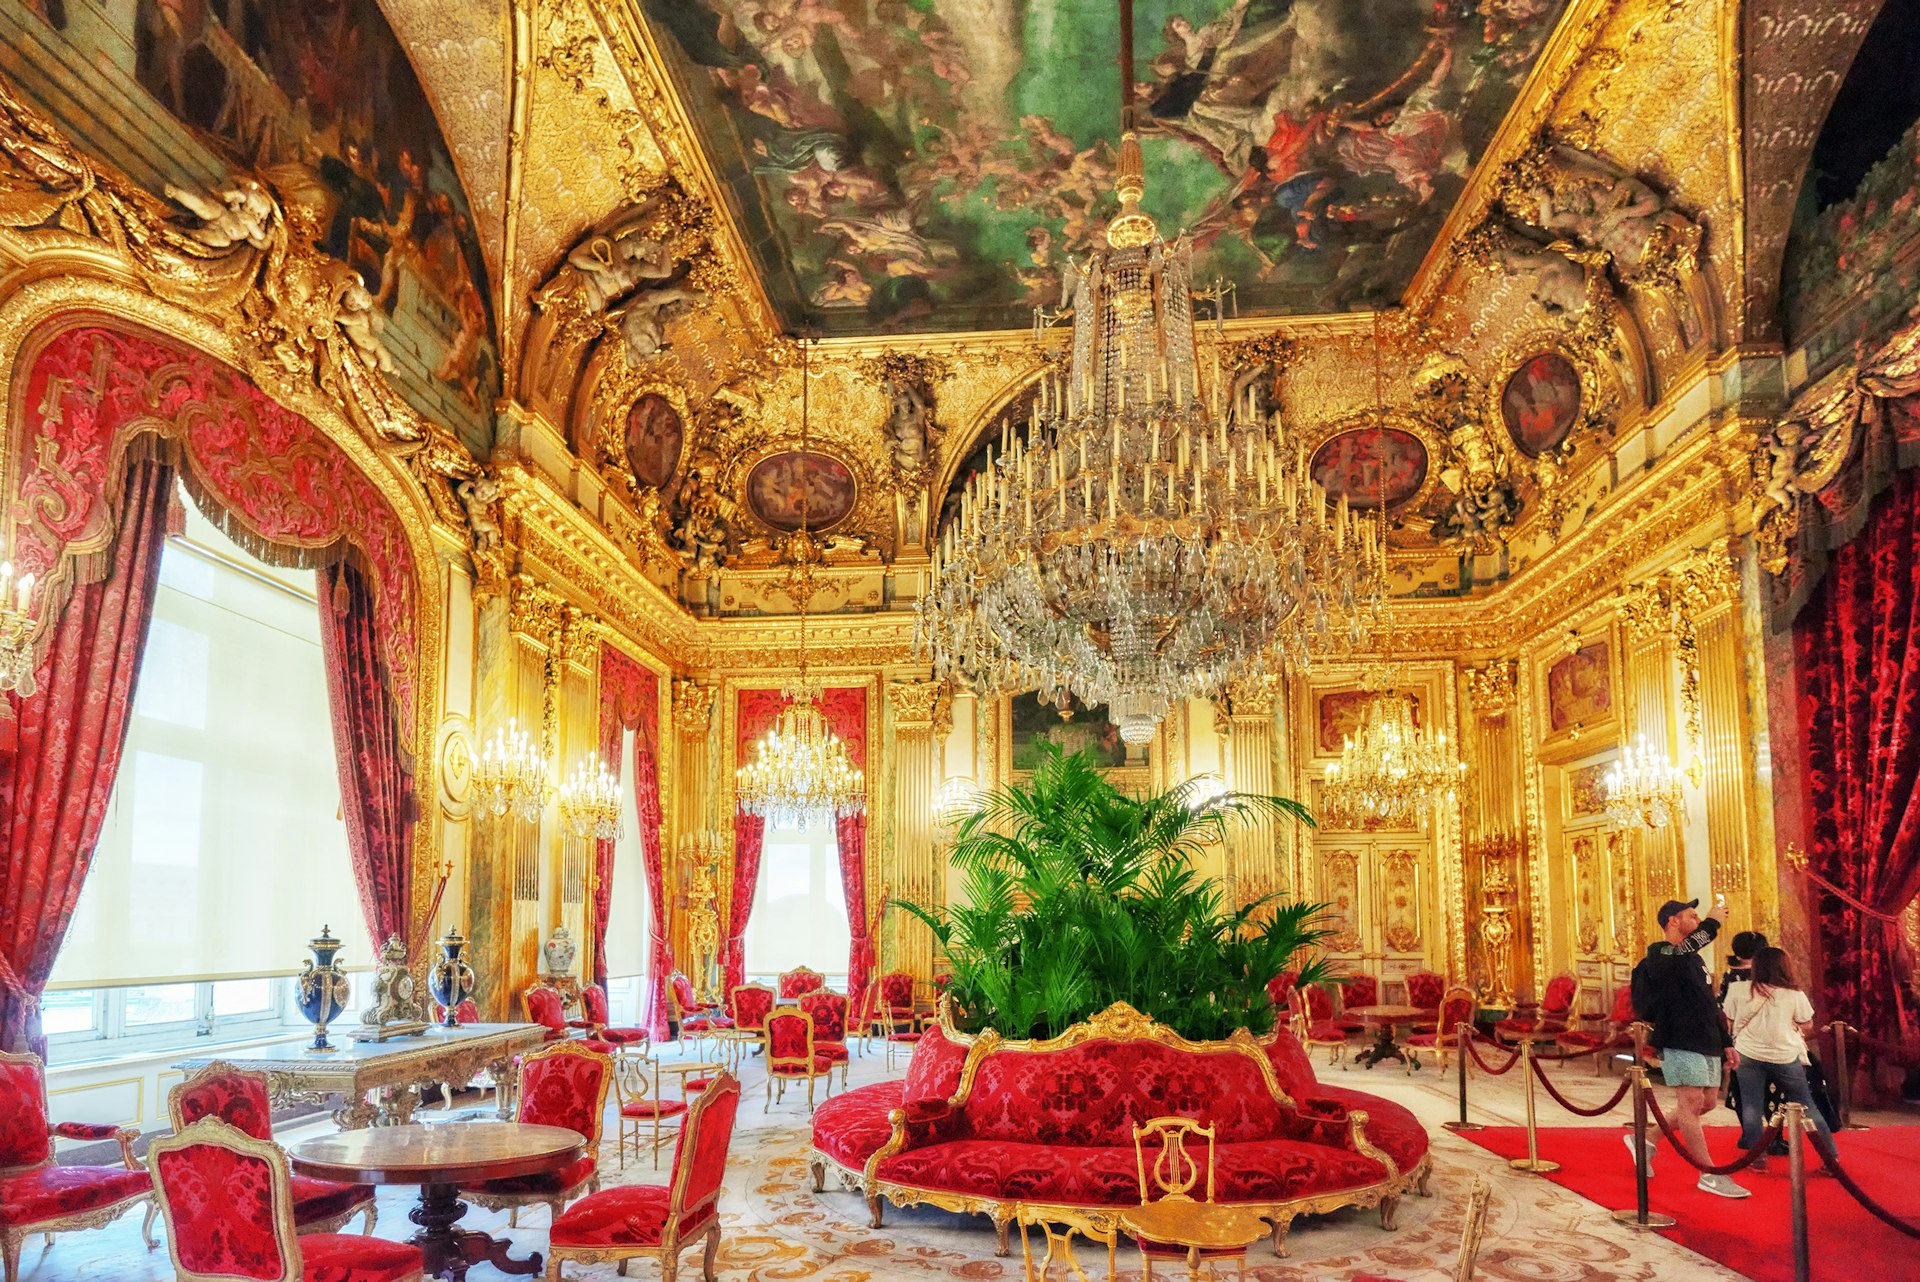 One of the grand rooms of the Napoléon III apartments; lavish chandeliers dangle from the ceiling, red-tasselled curtains hang around the windows and the ceiling is gilded with gold.